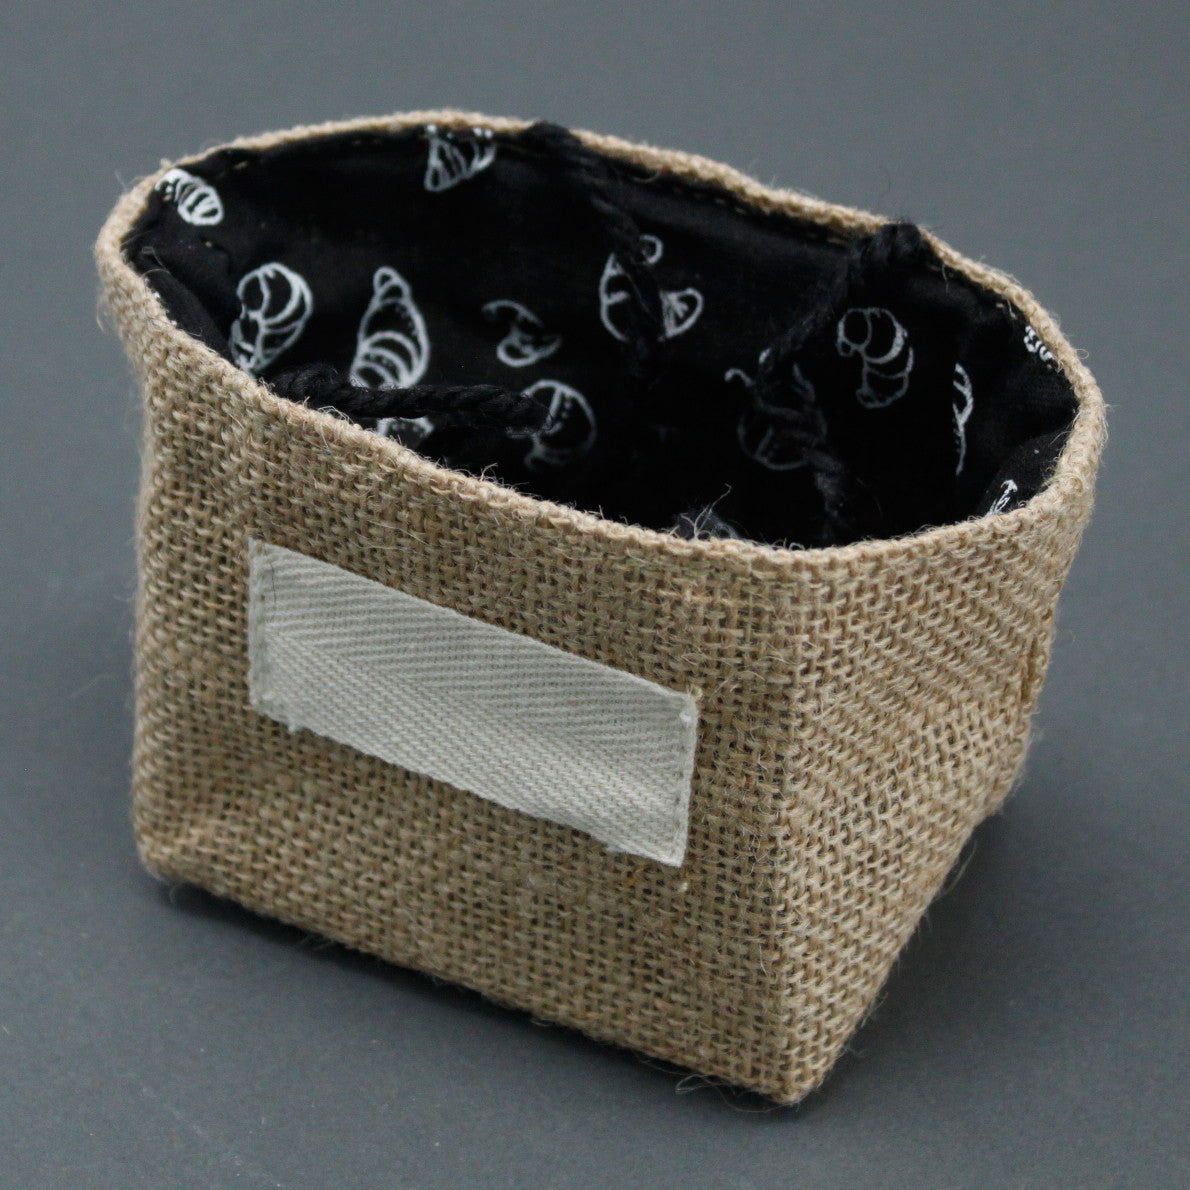 View Natural Jute Cotton Gift Bag Black Lining Small information